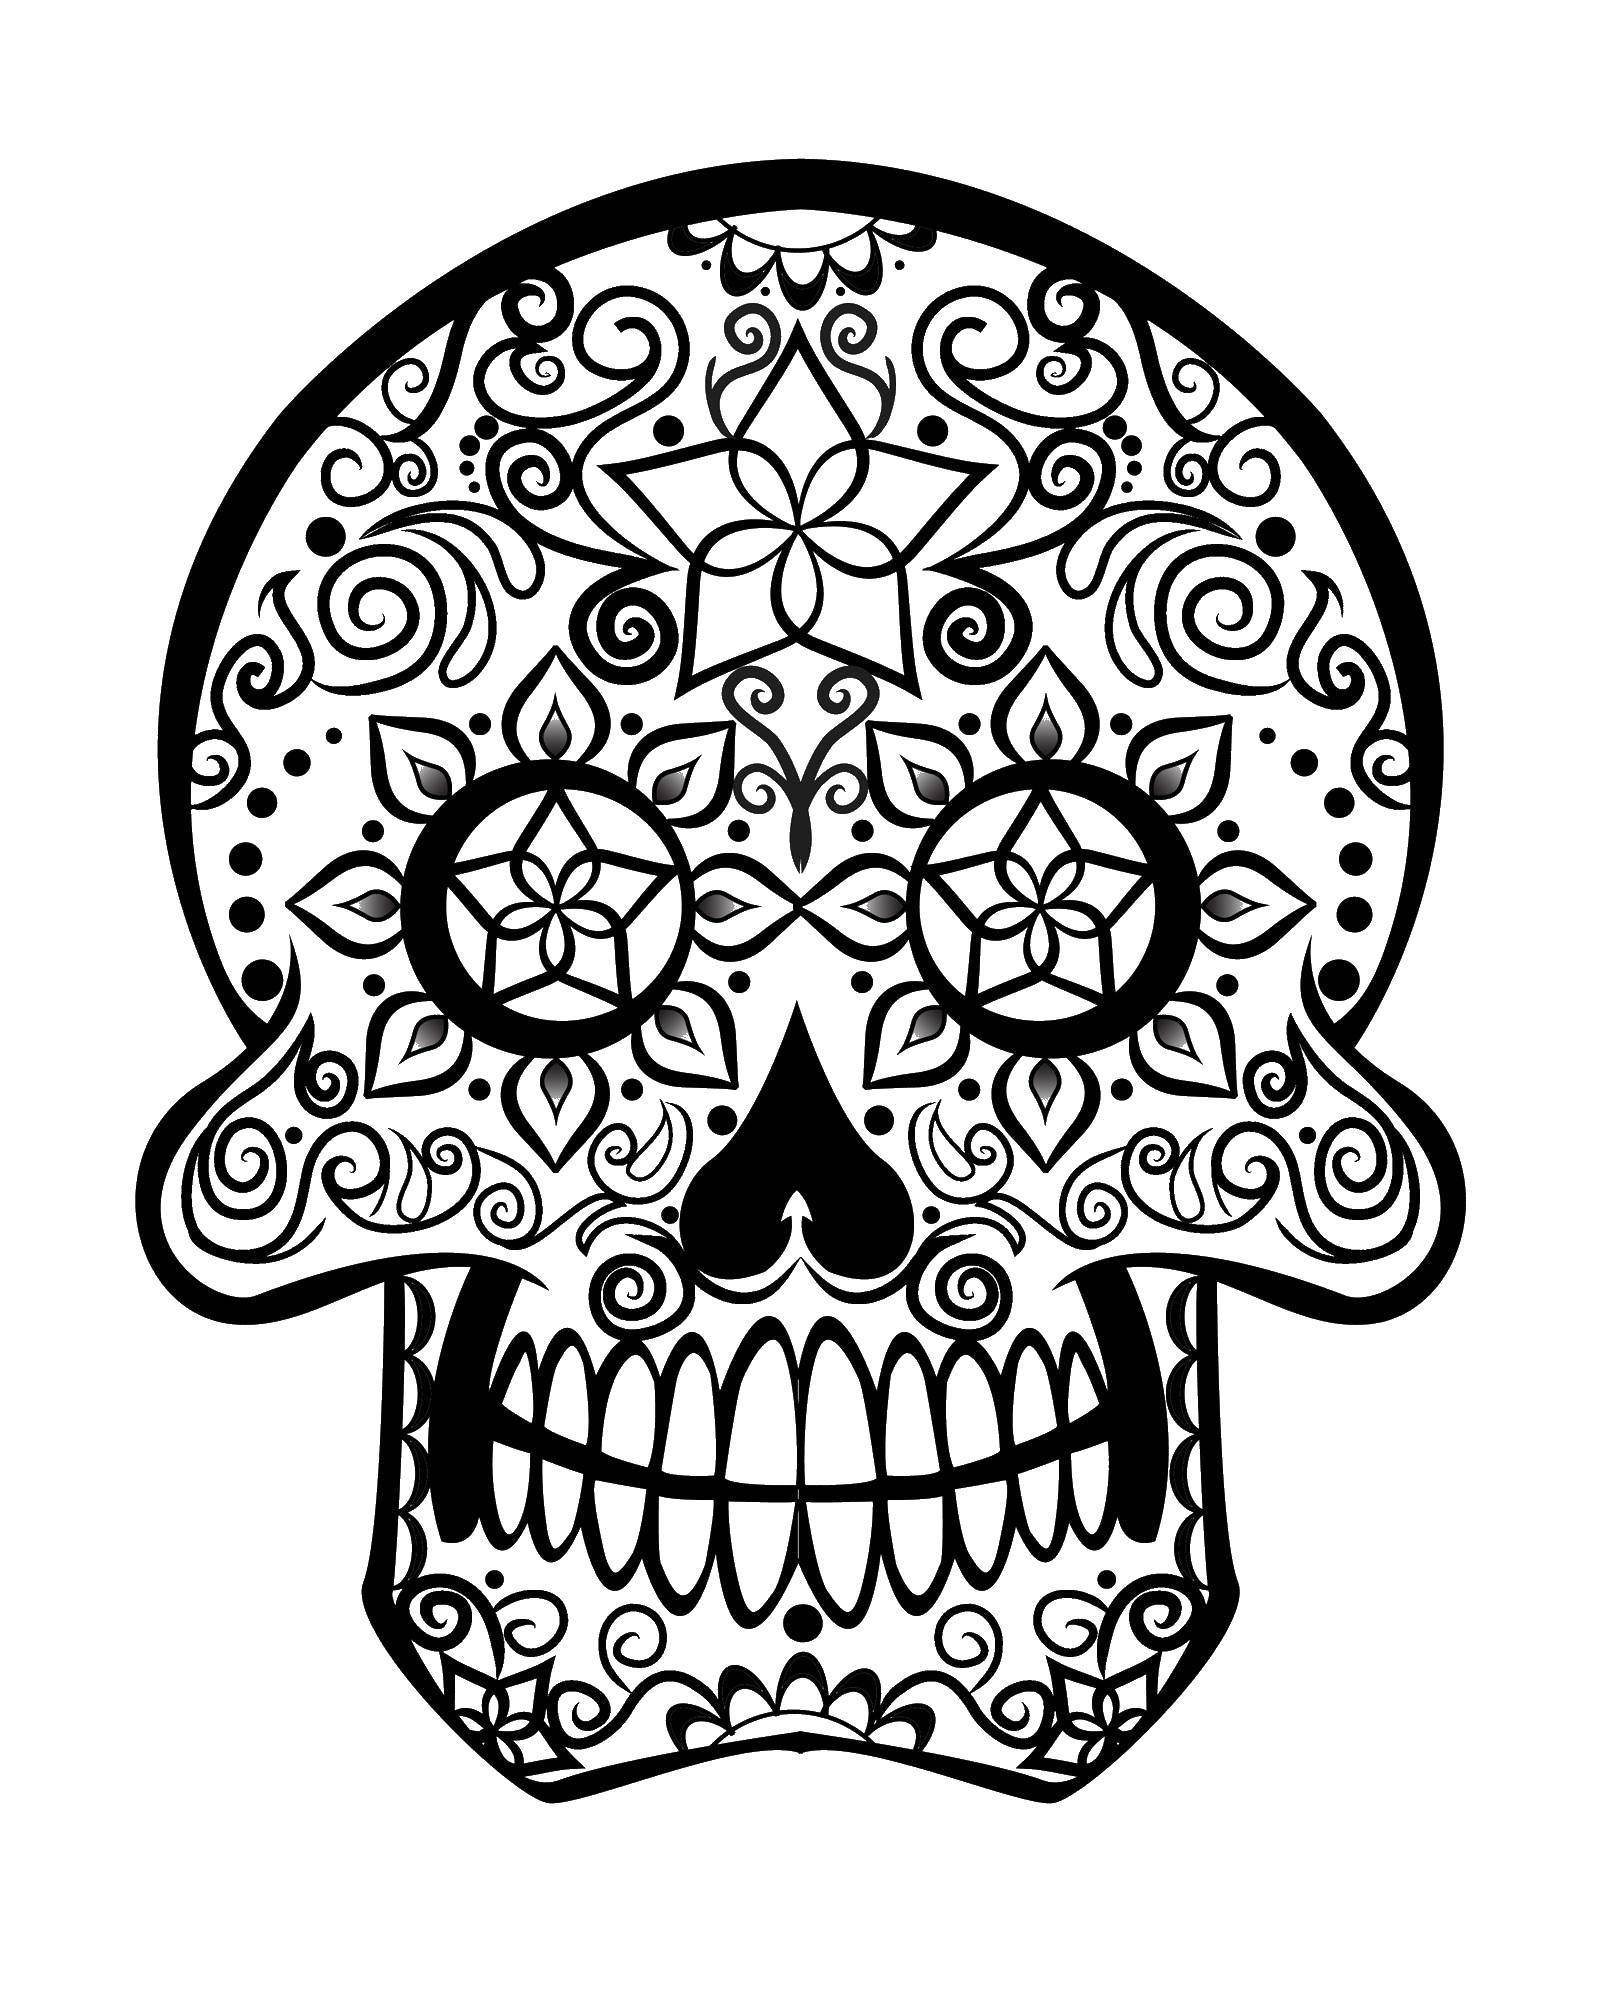 Coloring The crock in the patterns. Category Skull. Tags:  Skull, patterns, flower.